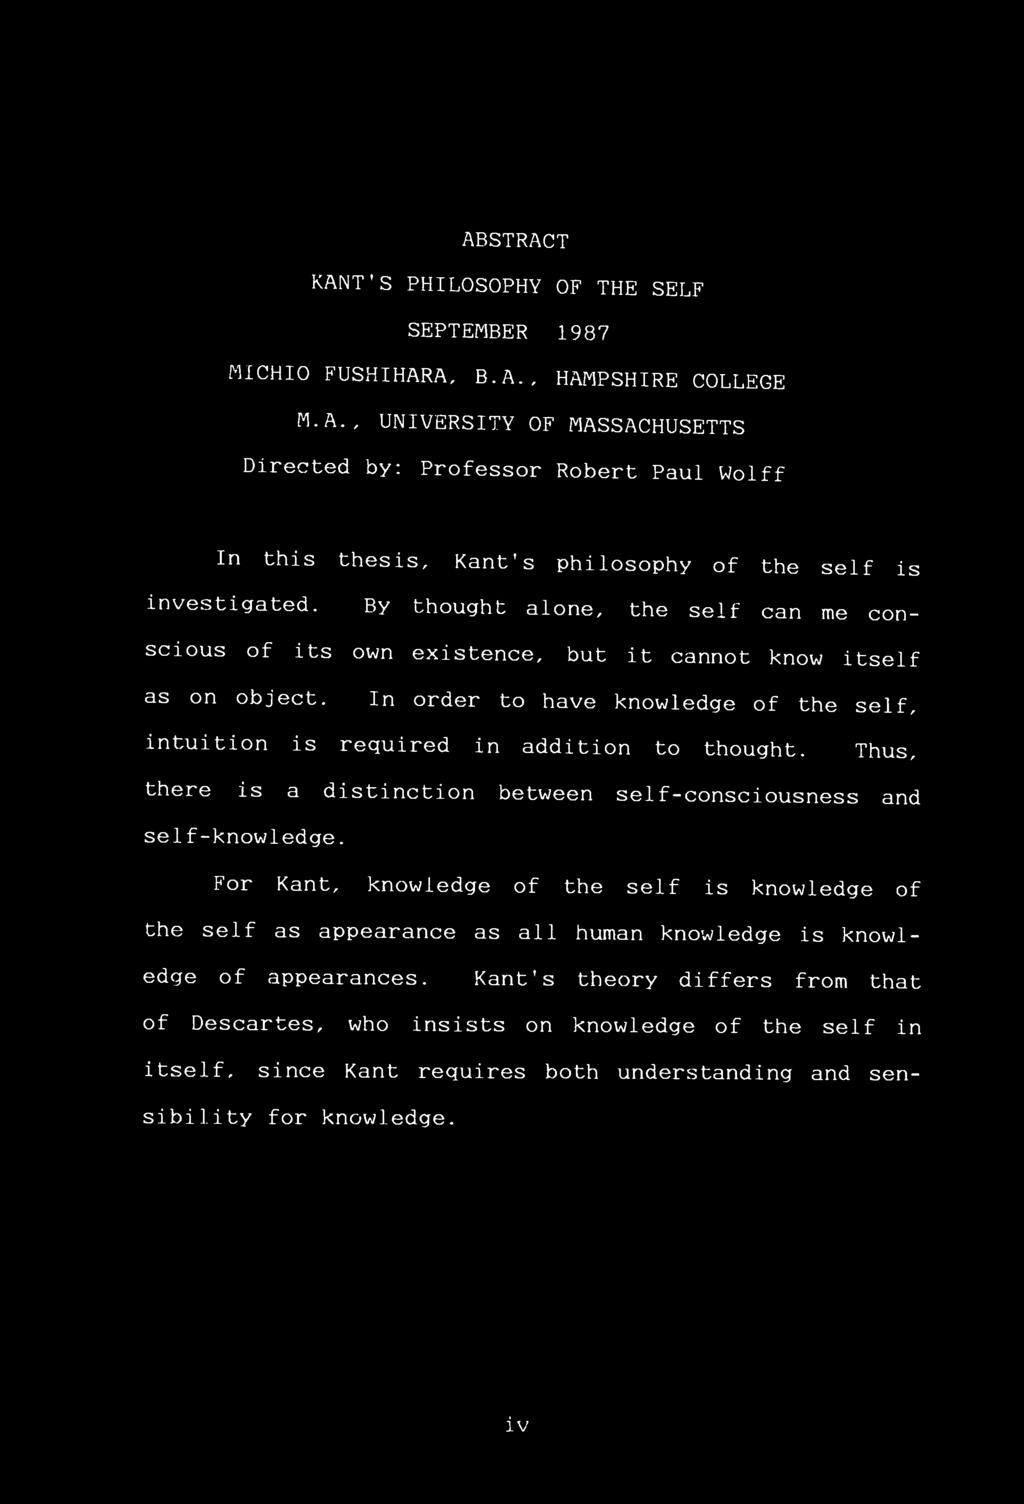 ABSTRACT KANT'S PHILOSOPHY OF THE SELF SEPTEMBER 1987 MICH 10 FUSHIHARA, B.A., HAMPSHIRE COLLEGE M.A., UNIVERSITY OF MASSACHUSETTS Directed by: Professor Robert Paul Wolff In this thesis, Kant s philosophy of the self is investigated.